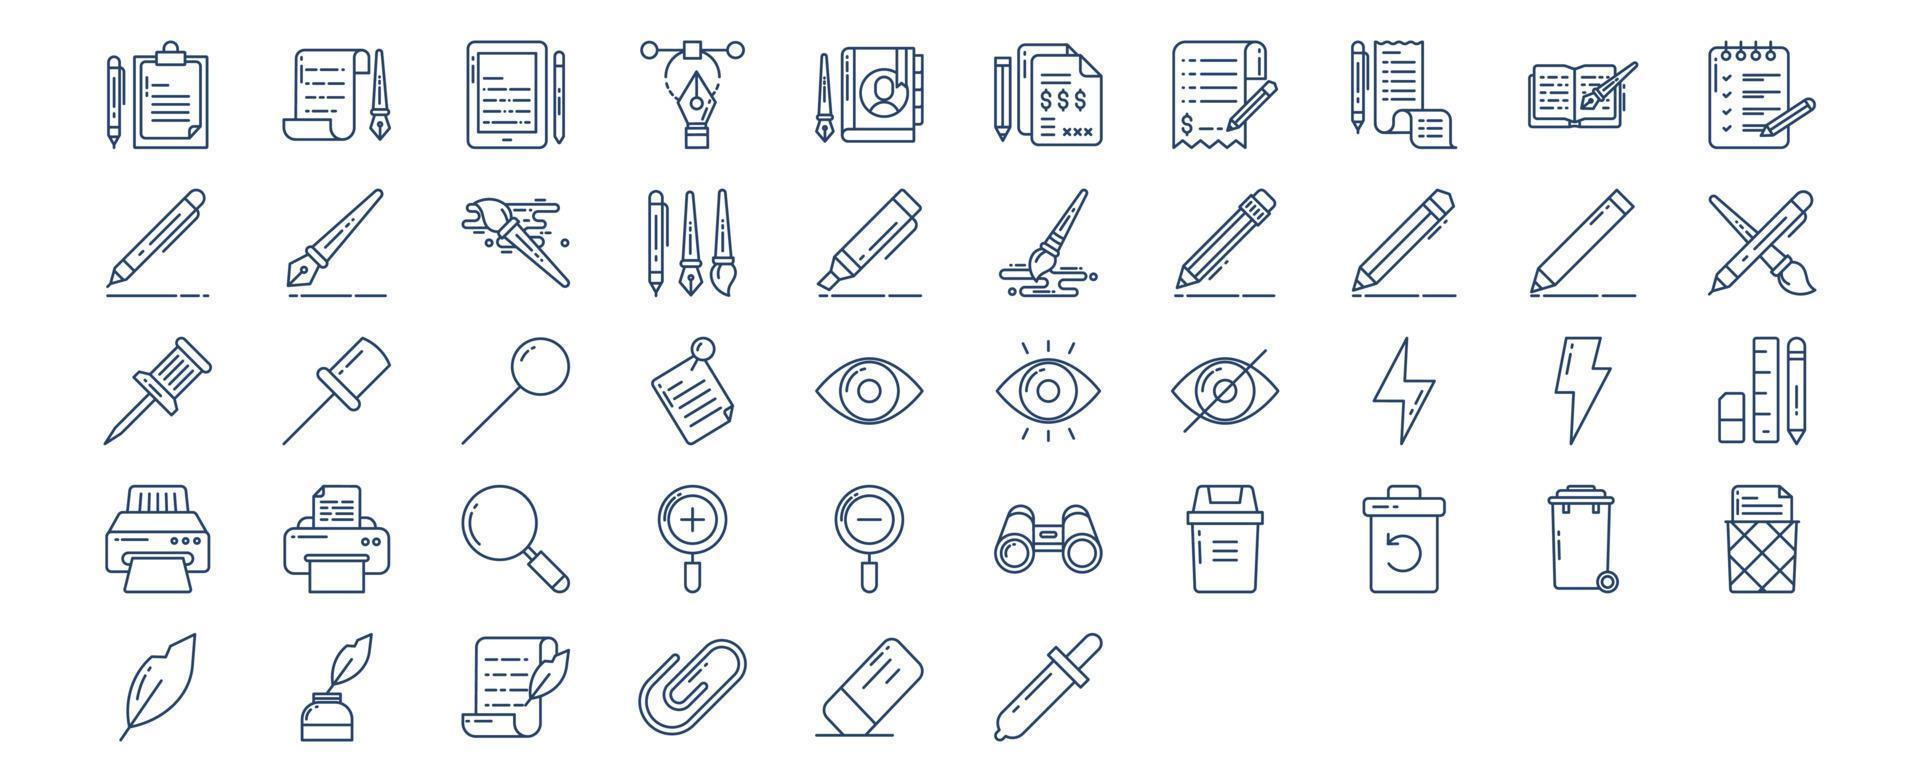 Collection of icons related to Content edition, including icons like Pencil, Brush, Pen, Document and more. vector illustrations, Pixel Perfect set